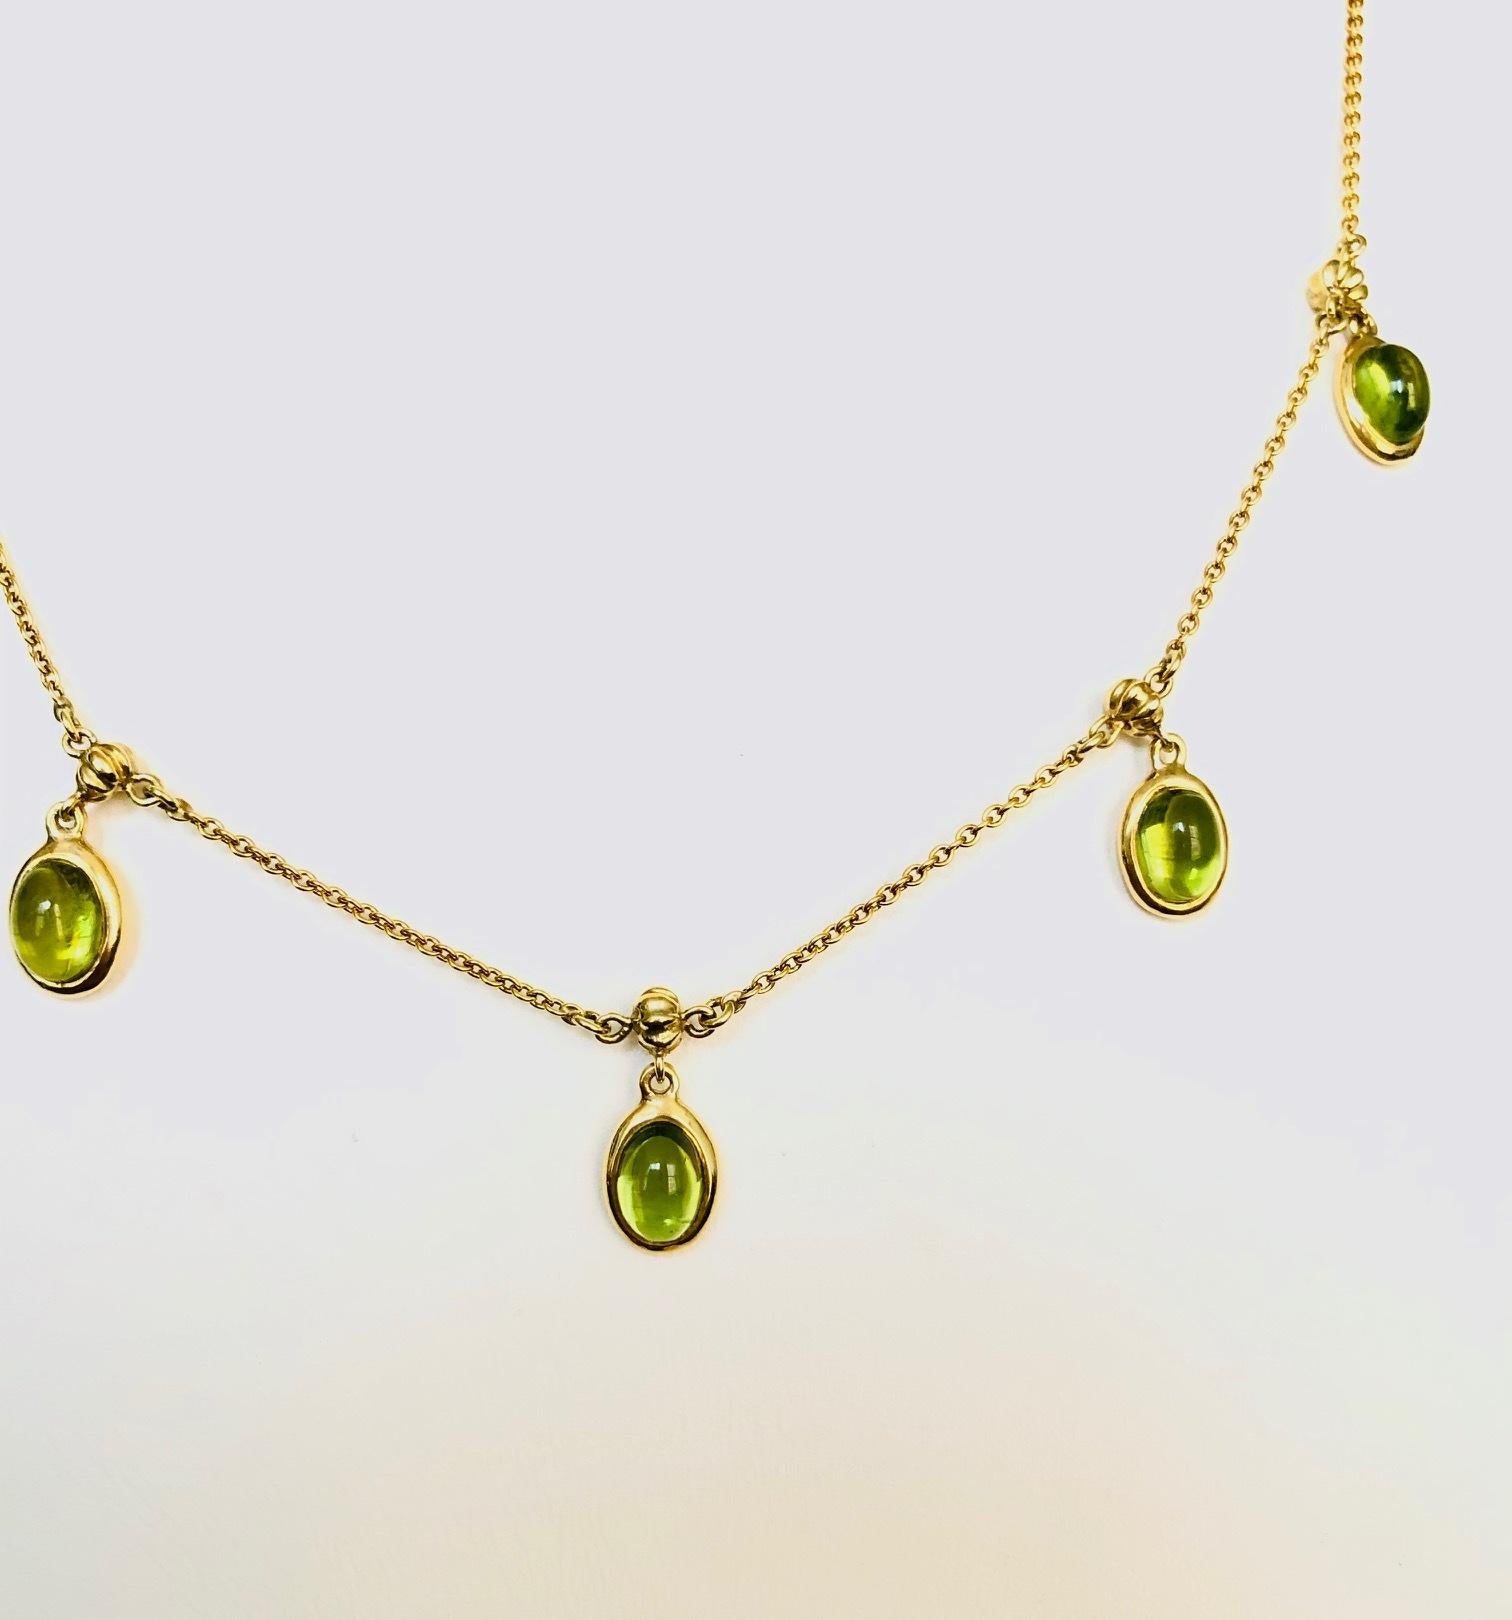 Modern, Necklace with dangling color stones, made in 18 Kt Yellow Gold, set with 5 Oval Cabochon Peridots 6.30 carats.
Available in many colors.

We manufacture all of our jewelry, in our workshop located in New York City's diamond district.